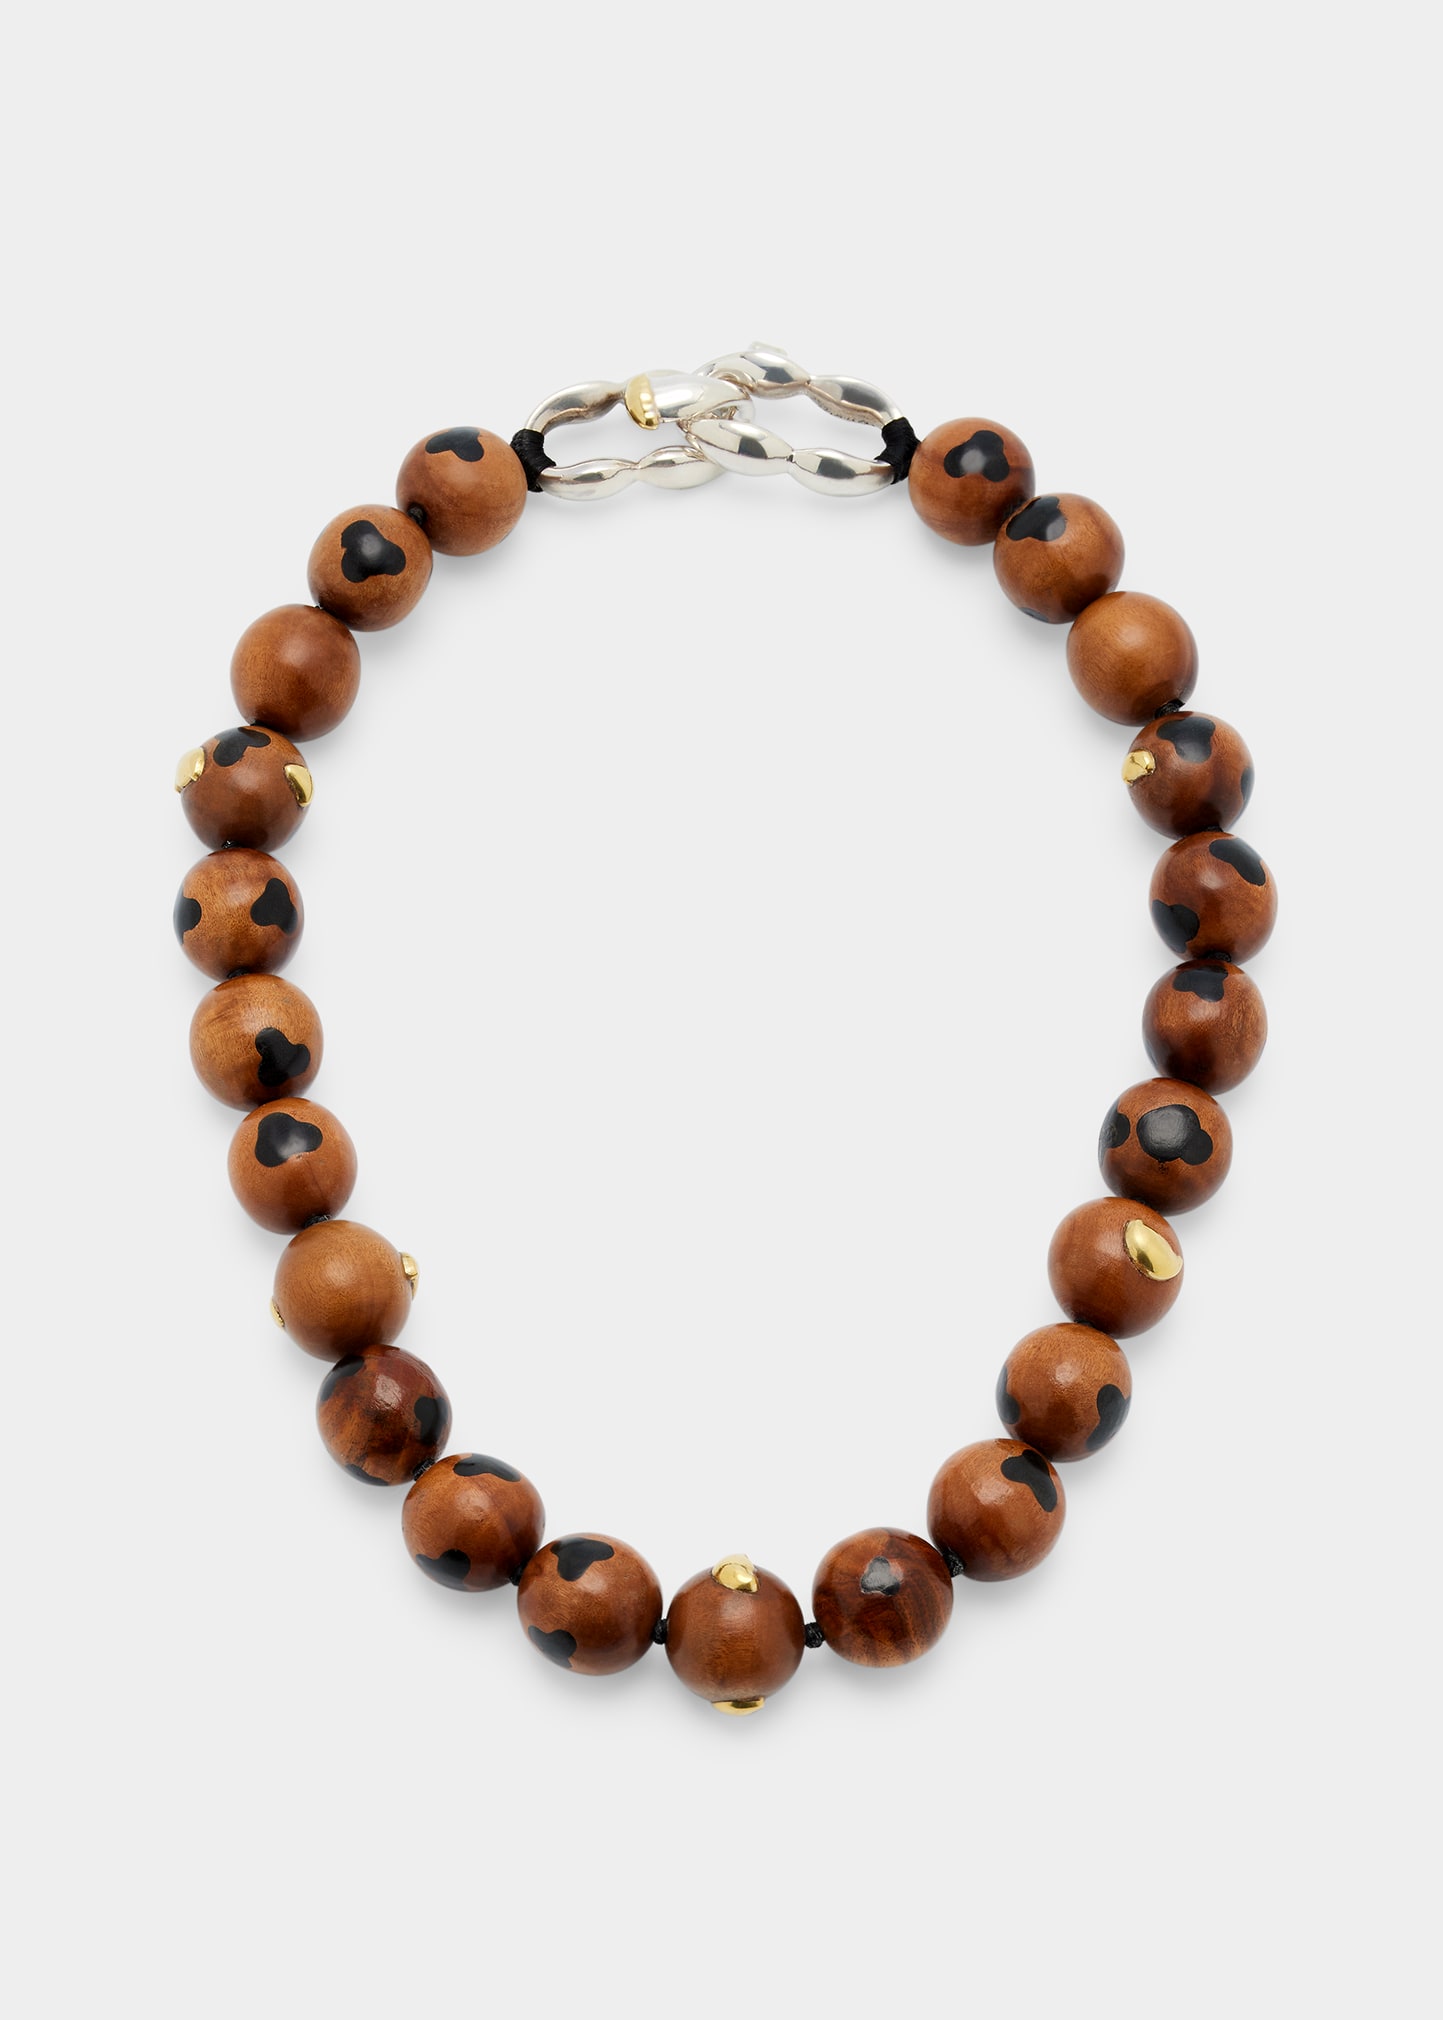 Hand-Carved Wood Necklace with Inset Ebony